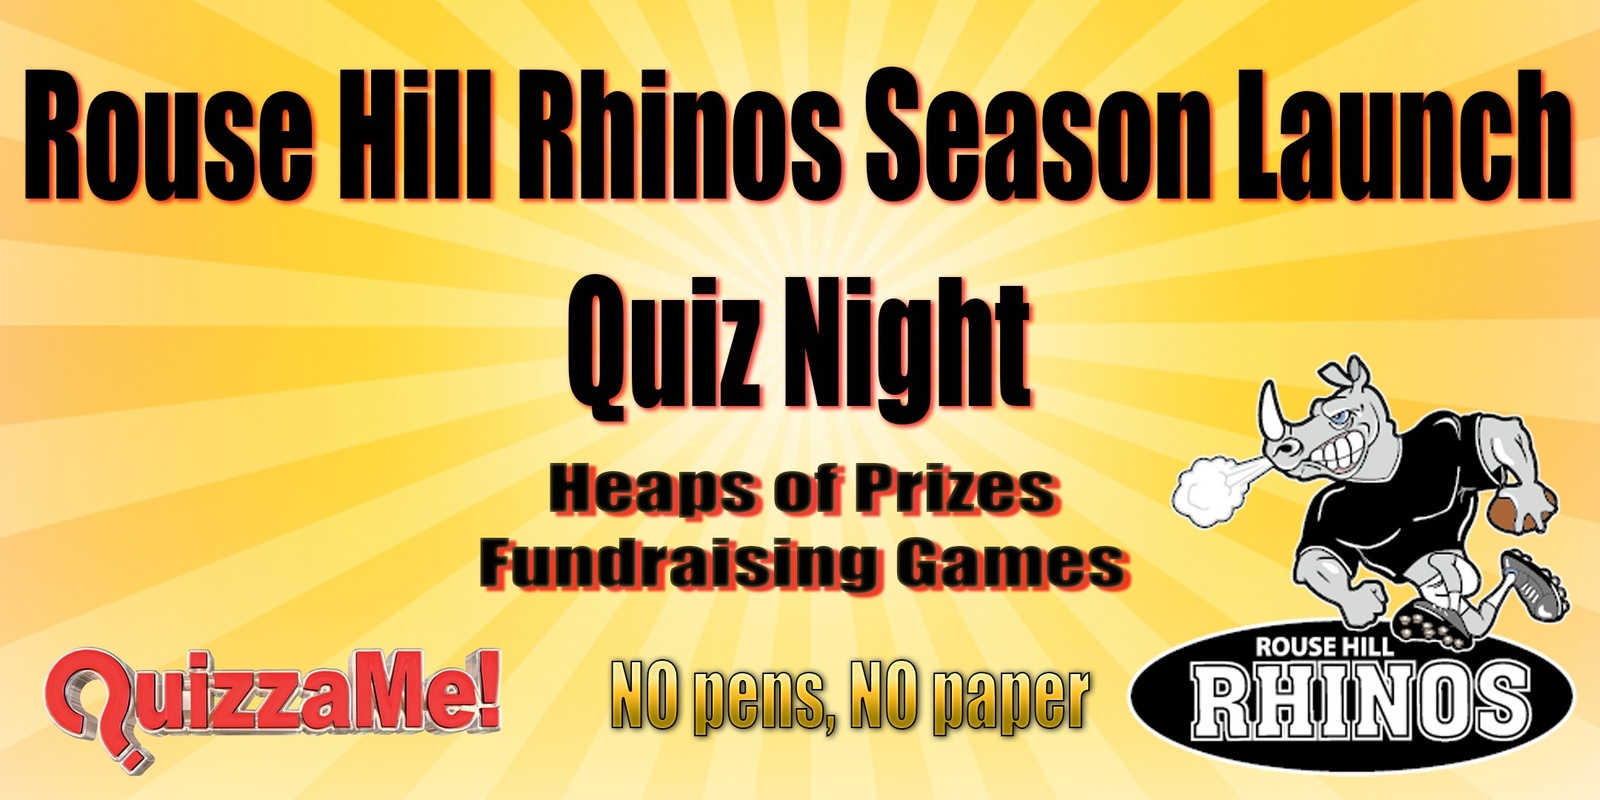 Banner image for Rouse Hill Rhinos Season Launch Quiz Night